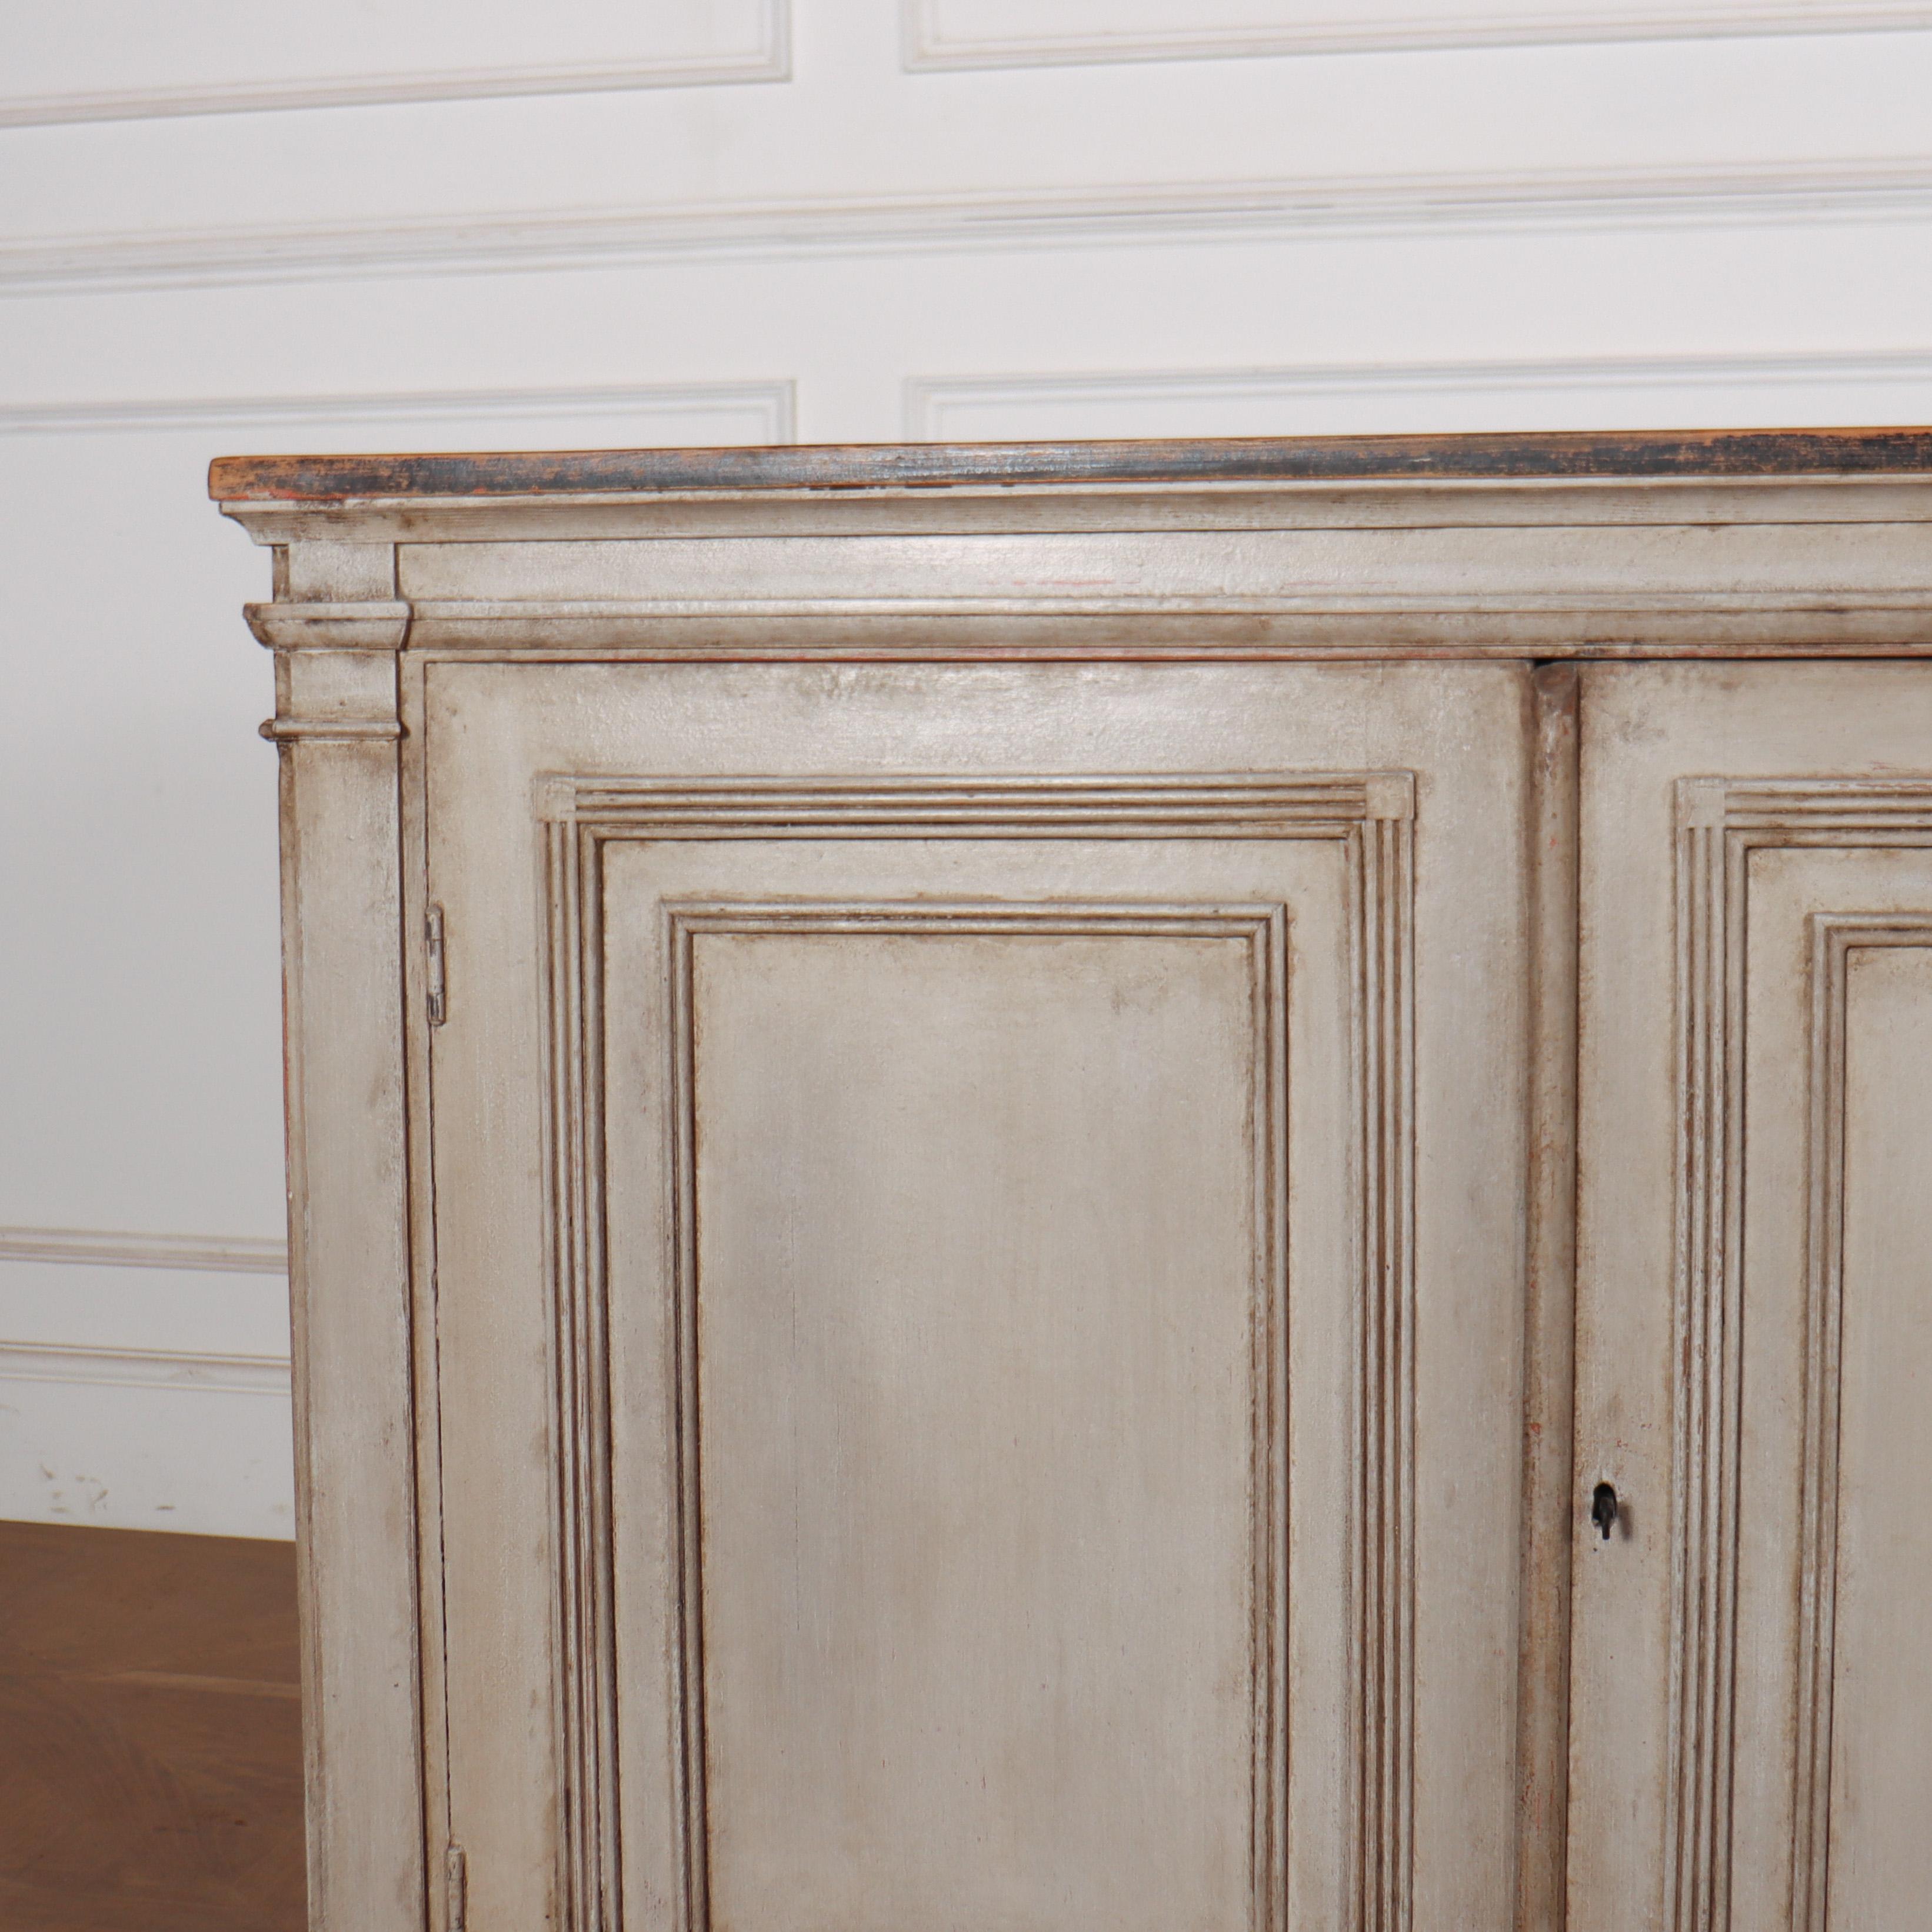 Large 19th C Swedish painted pine four door enfilade with a distressed top. 1840.

Reference: 8139

Dimensions
90 inches (229 cms) Wide
19 inches (48 cms) Deep
36 inches (91 cms) High